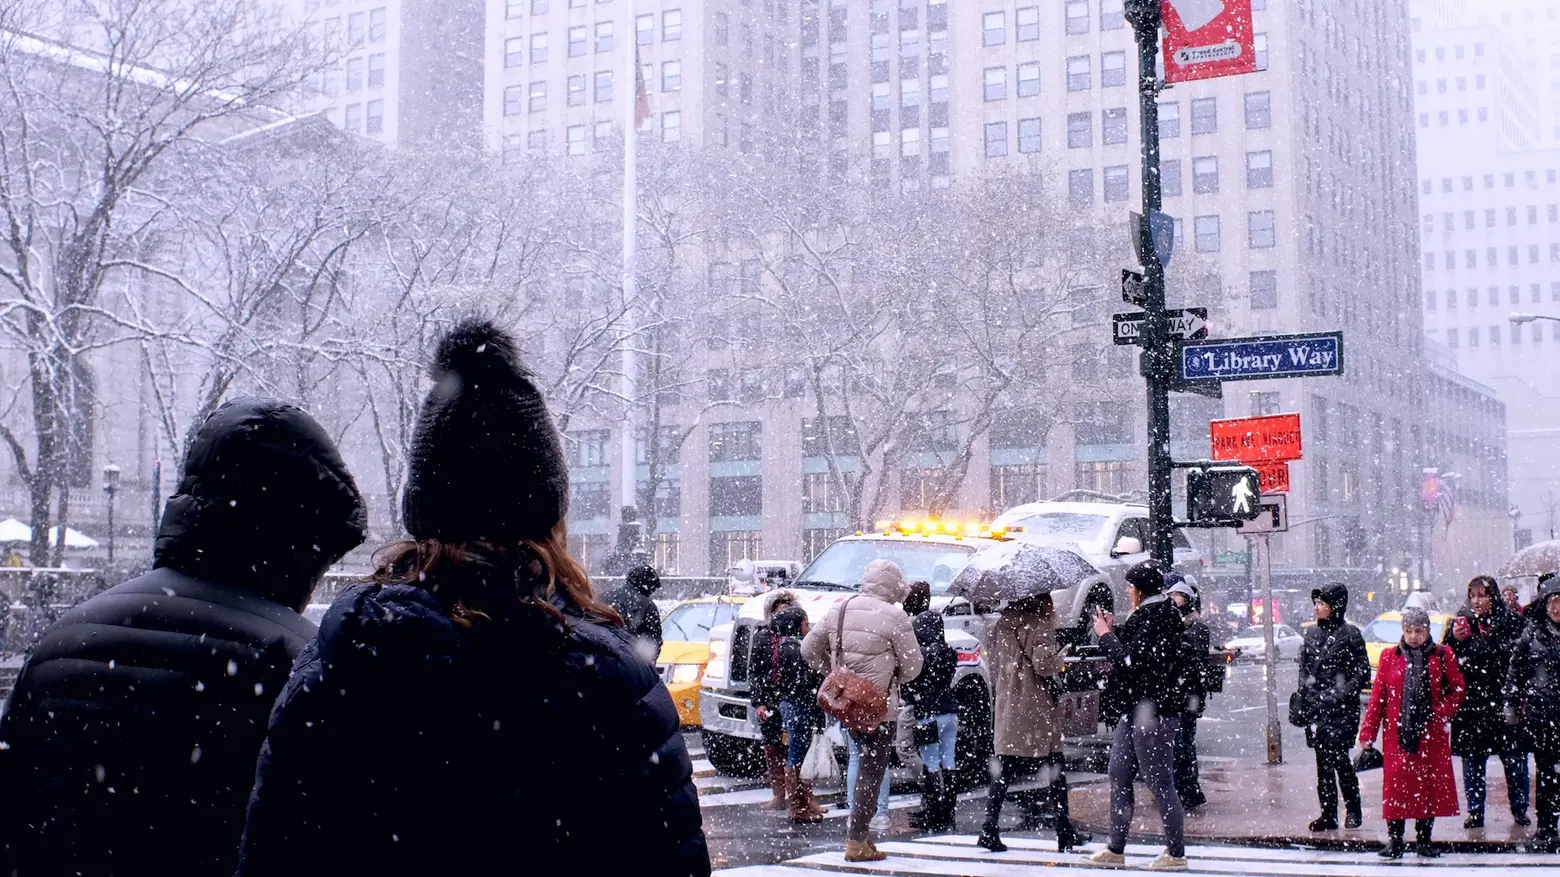 Enjoy discounted dinners, Broadway shows, and hotel stays during NYC’s ‘Winter Outing’